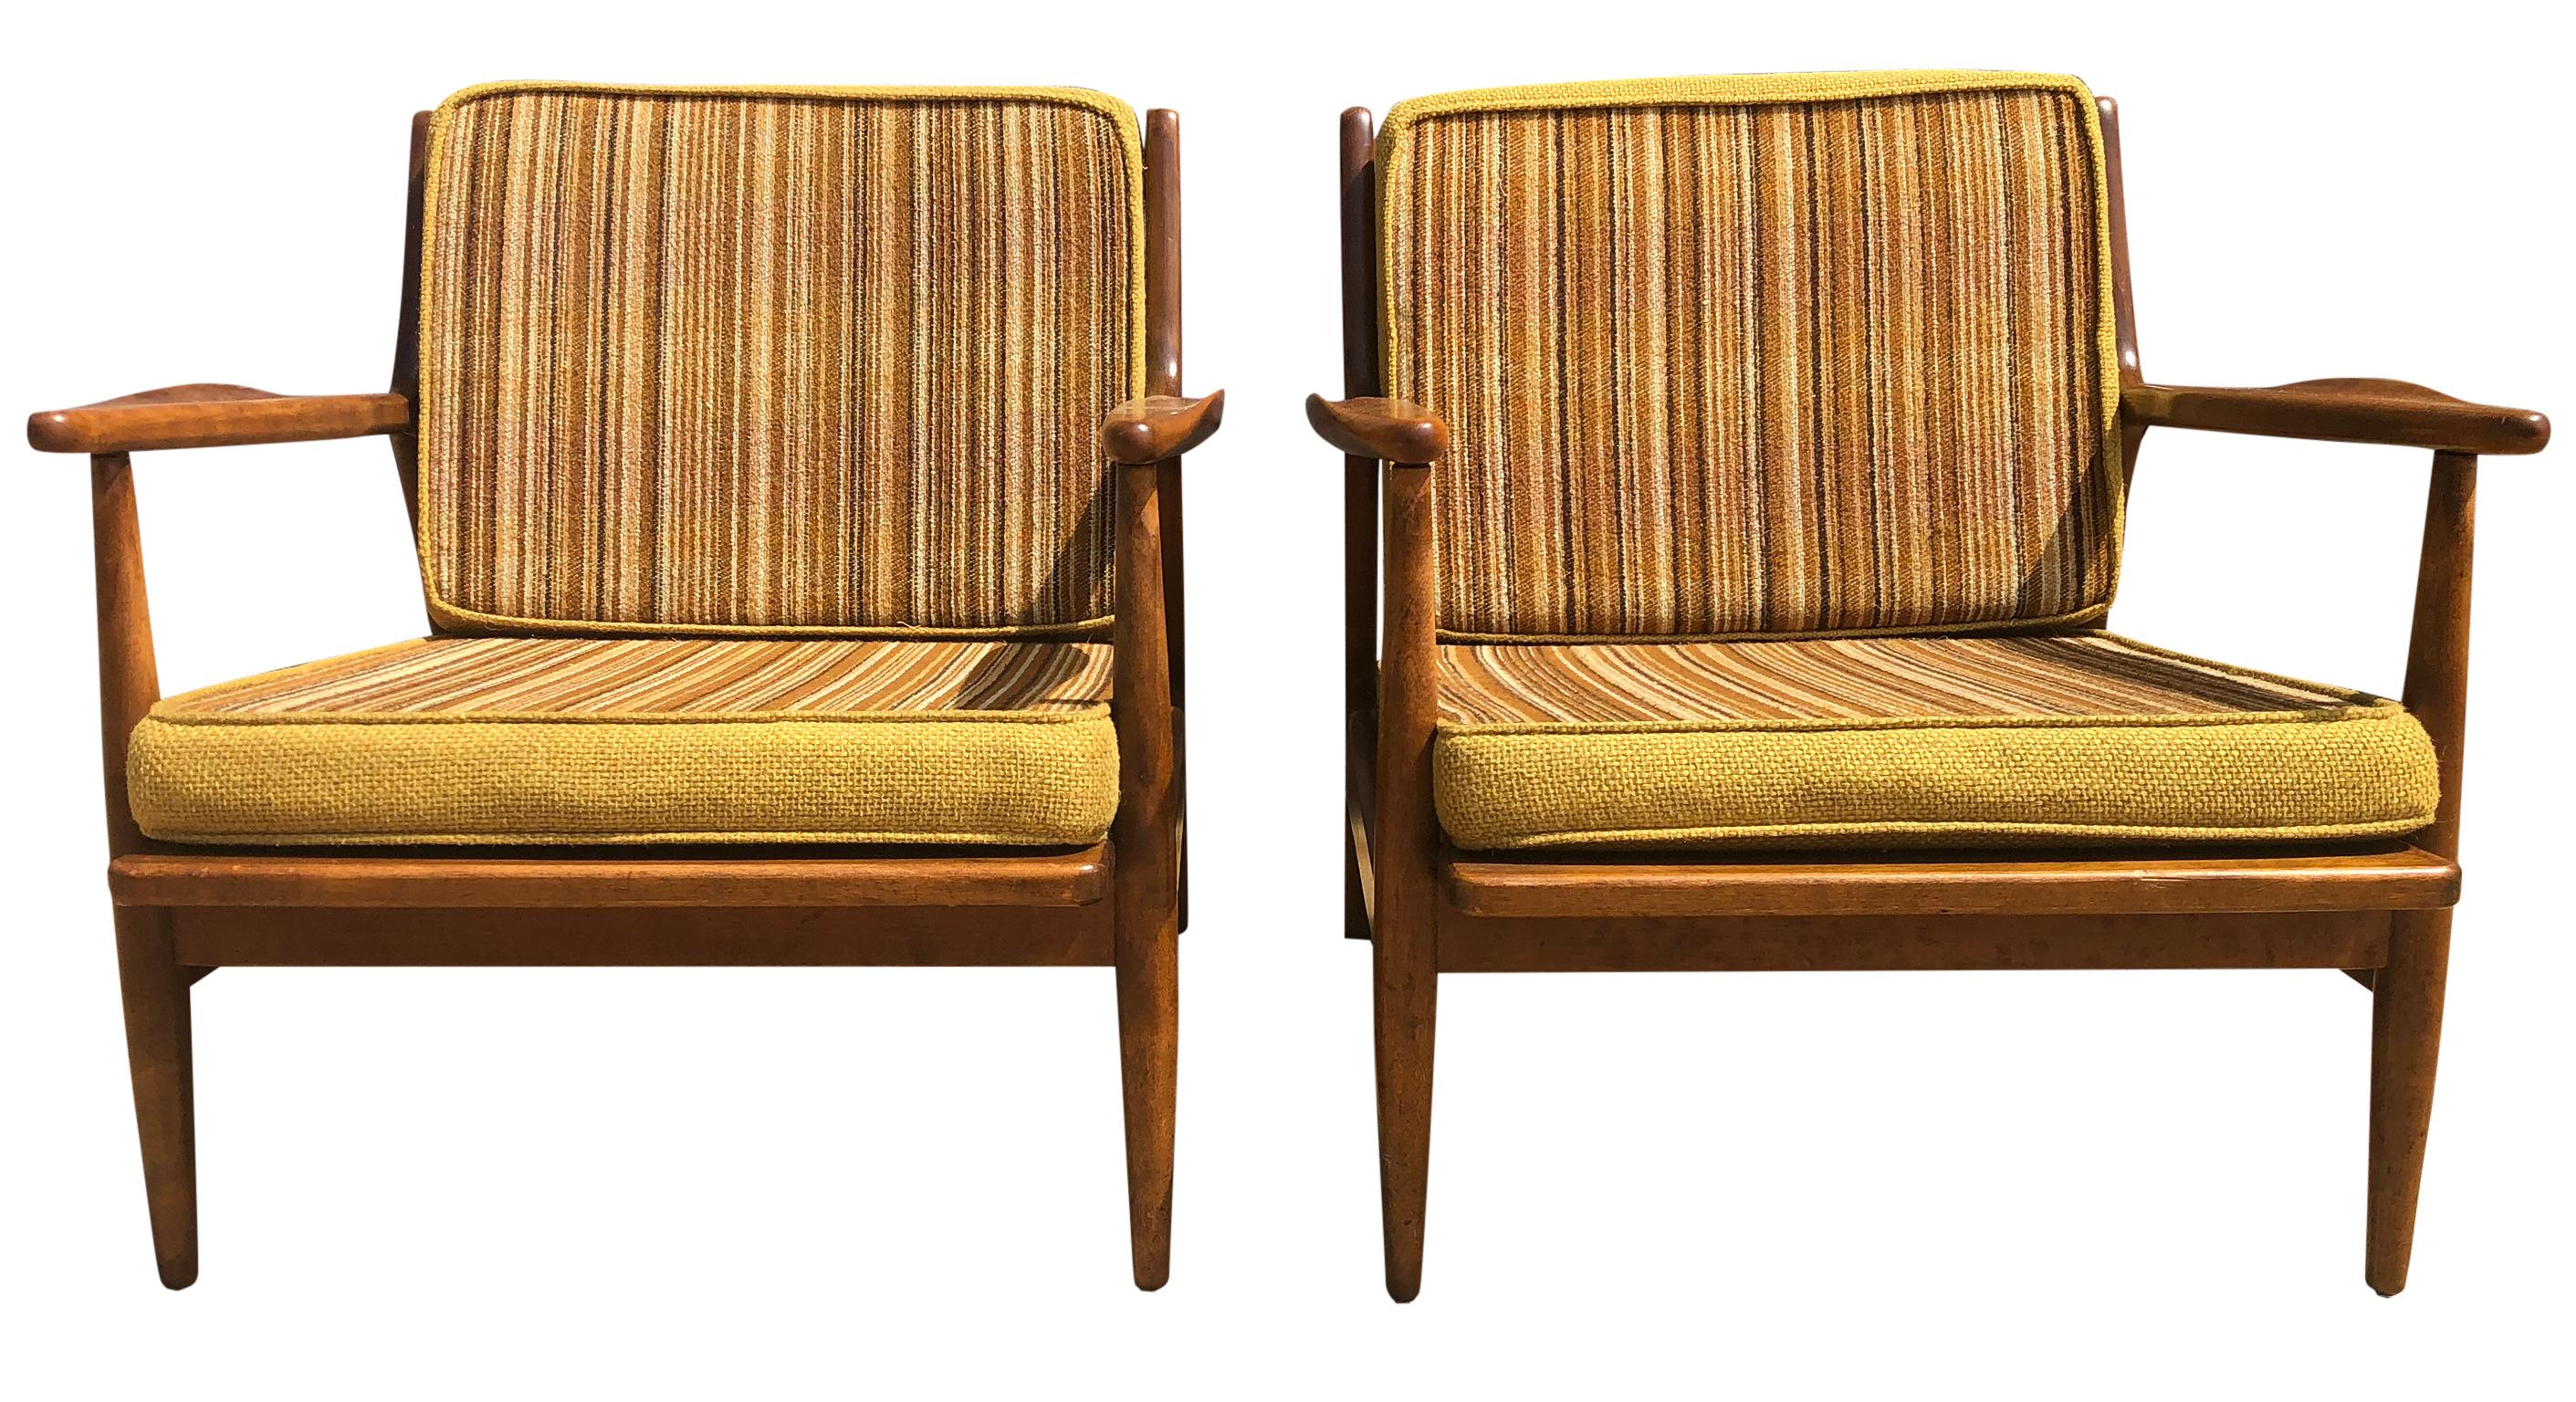 Pair of original midcentury Russel Wright for Conant Ball All maple low lounge chairs. Arms have unique upward curve - great lines. Solid Maple frames with spindle back and all Original yellow/brown striped upholstery. Original vintage condition